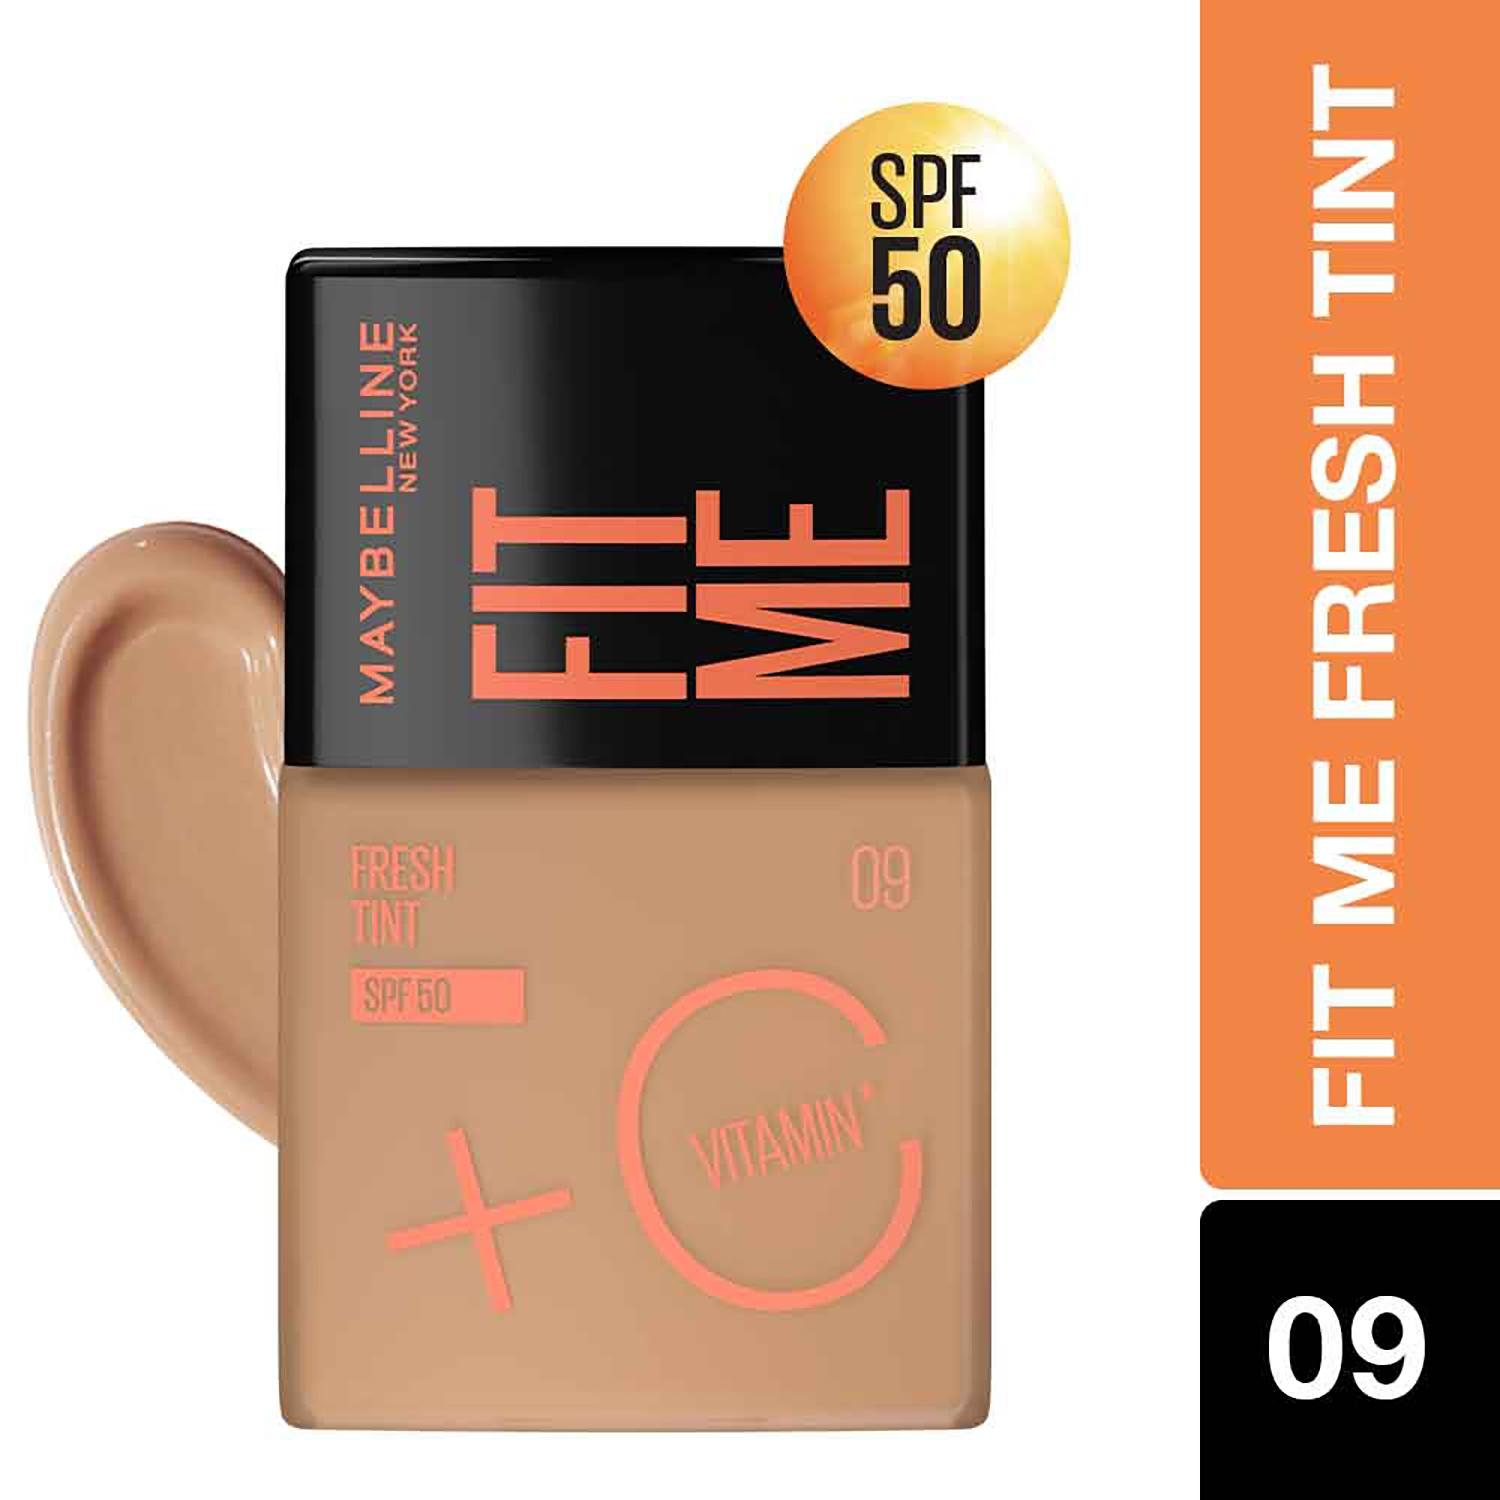 Maybelline New York | Maybelline New York Fit Me Fresh Tint With SPF 50 & Vitamin C - 09 Shade (30ml)